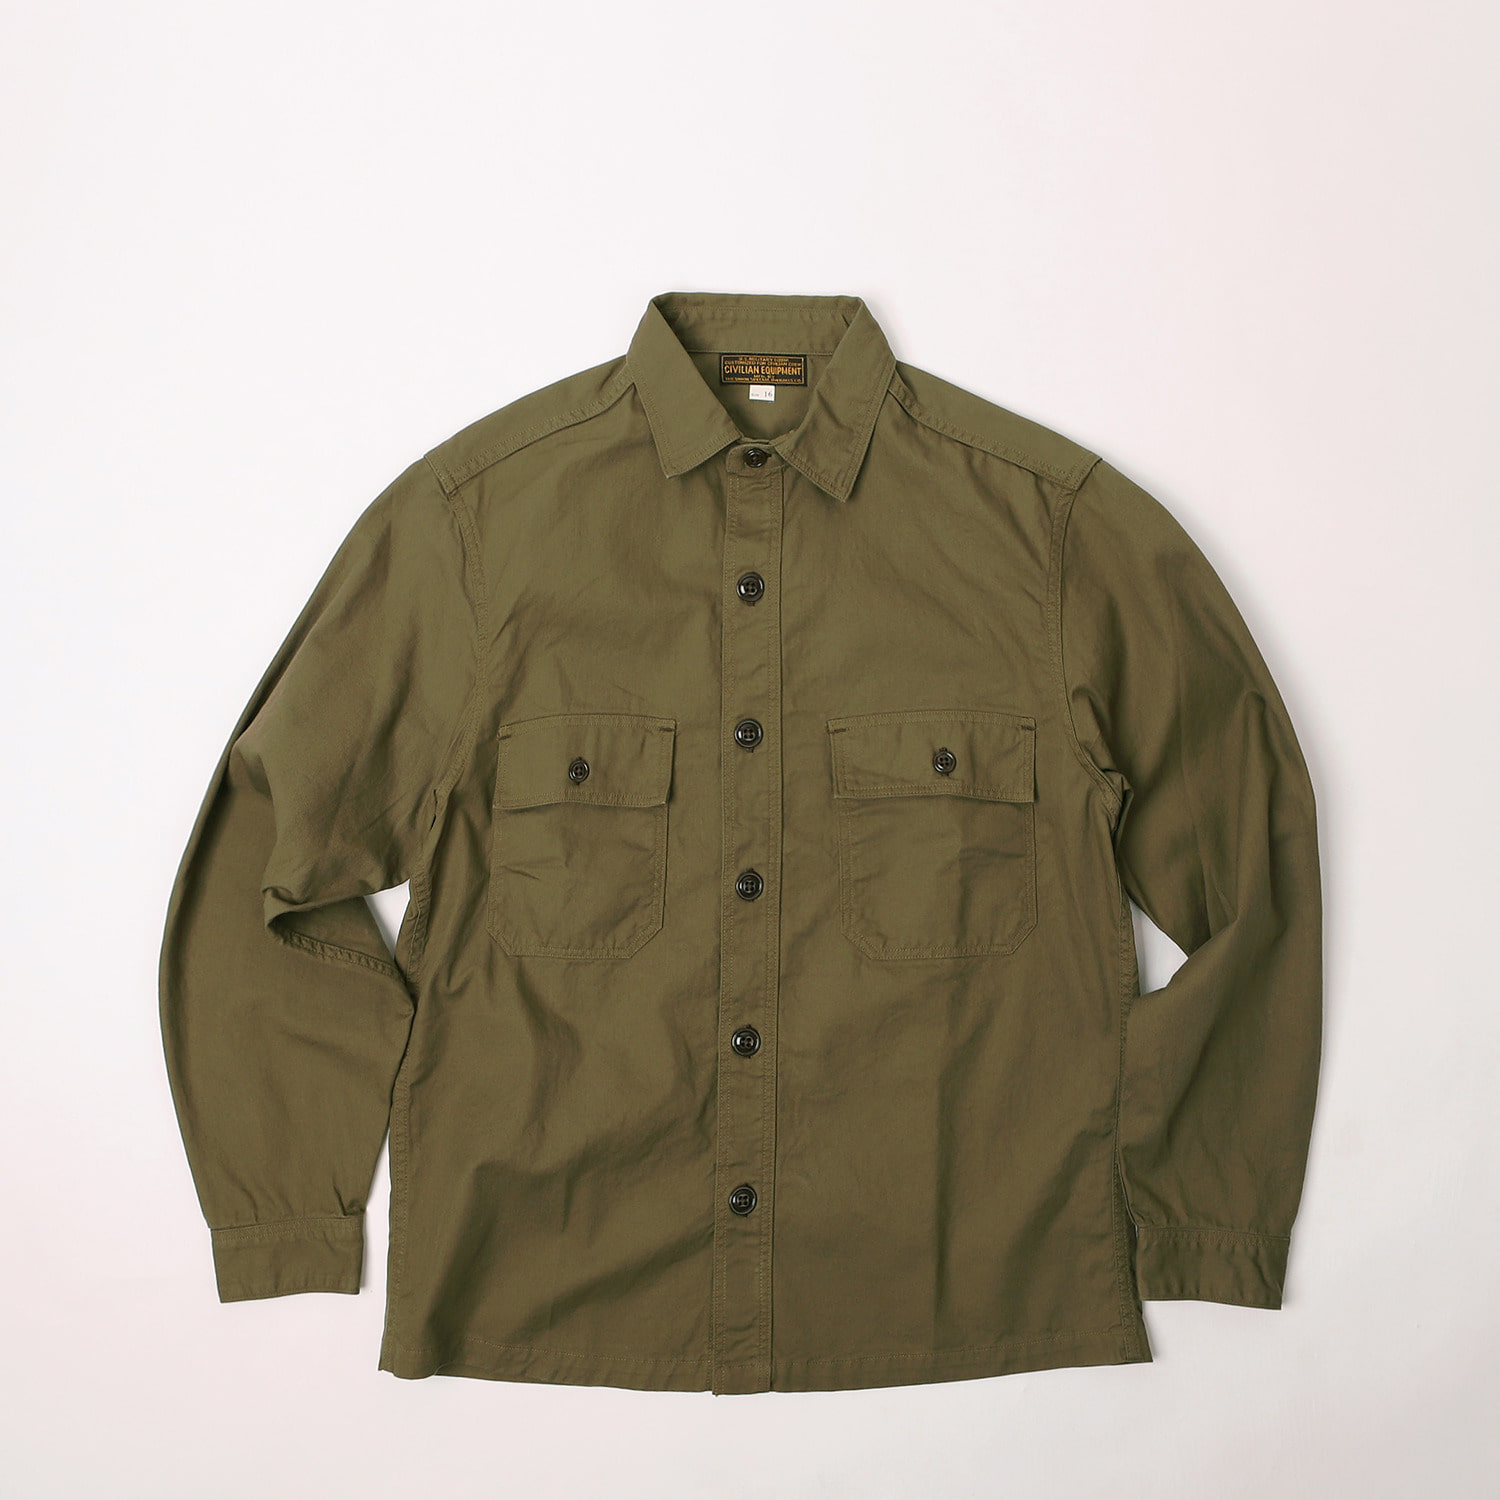 [UNION SPECIAL OVERALLS]Civilian Military ShirtMILITARY UTILITY SHIRT(Olive)